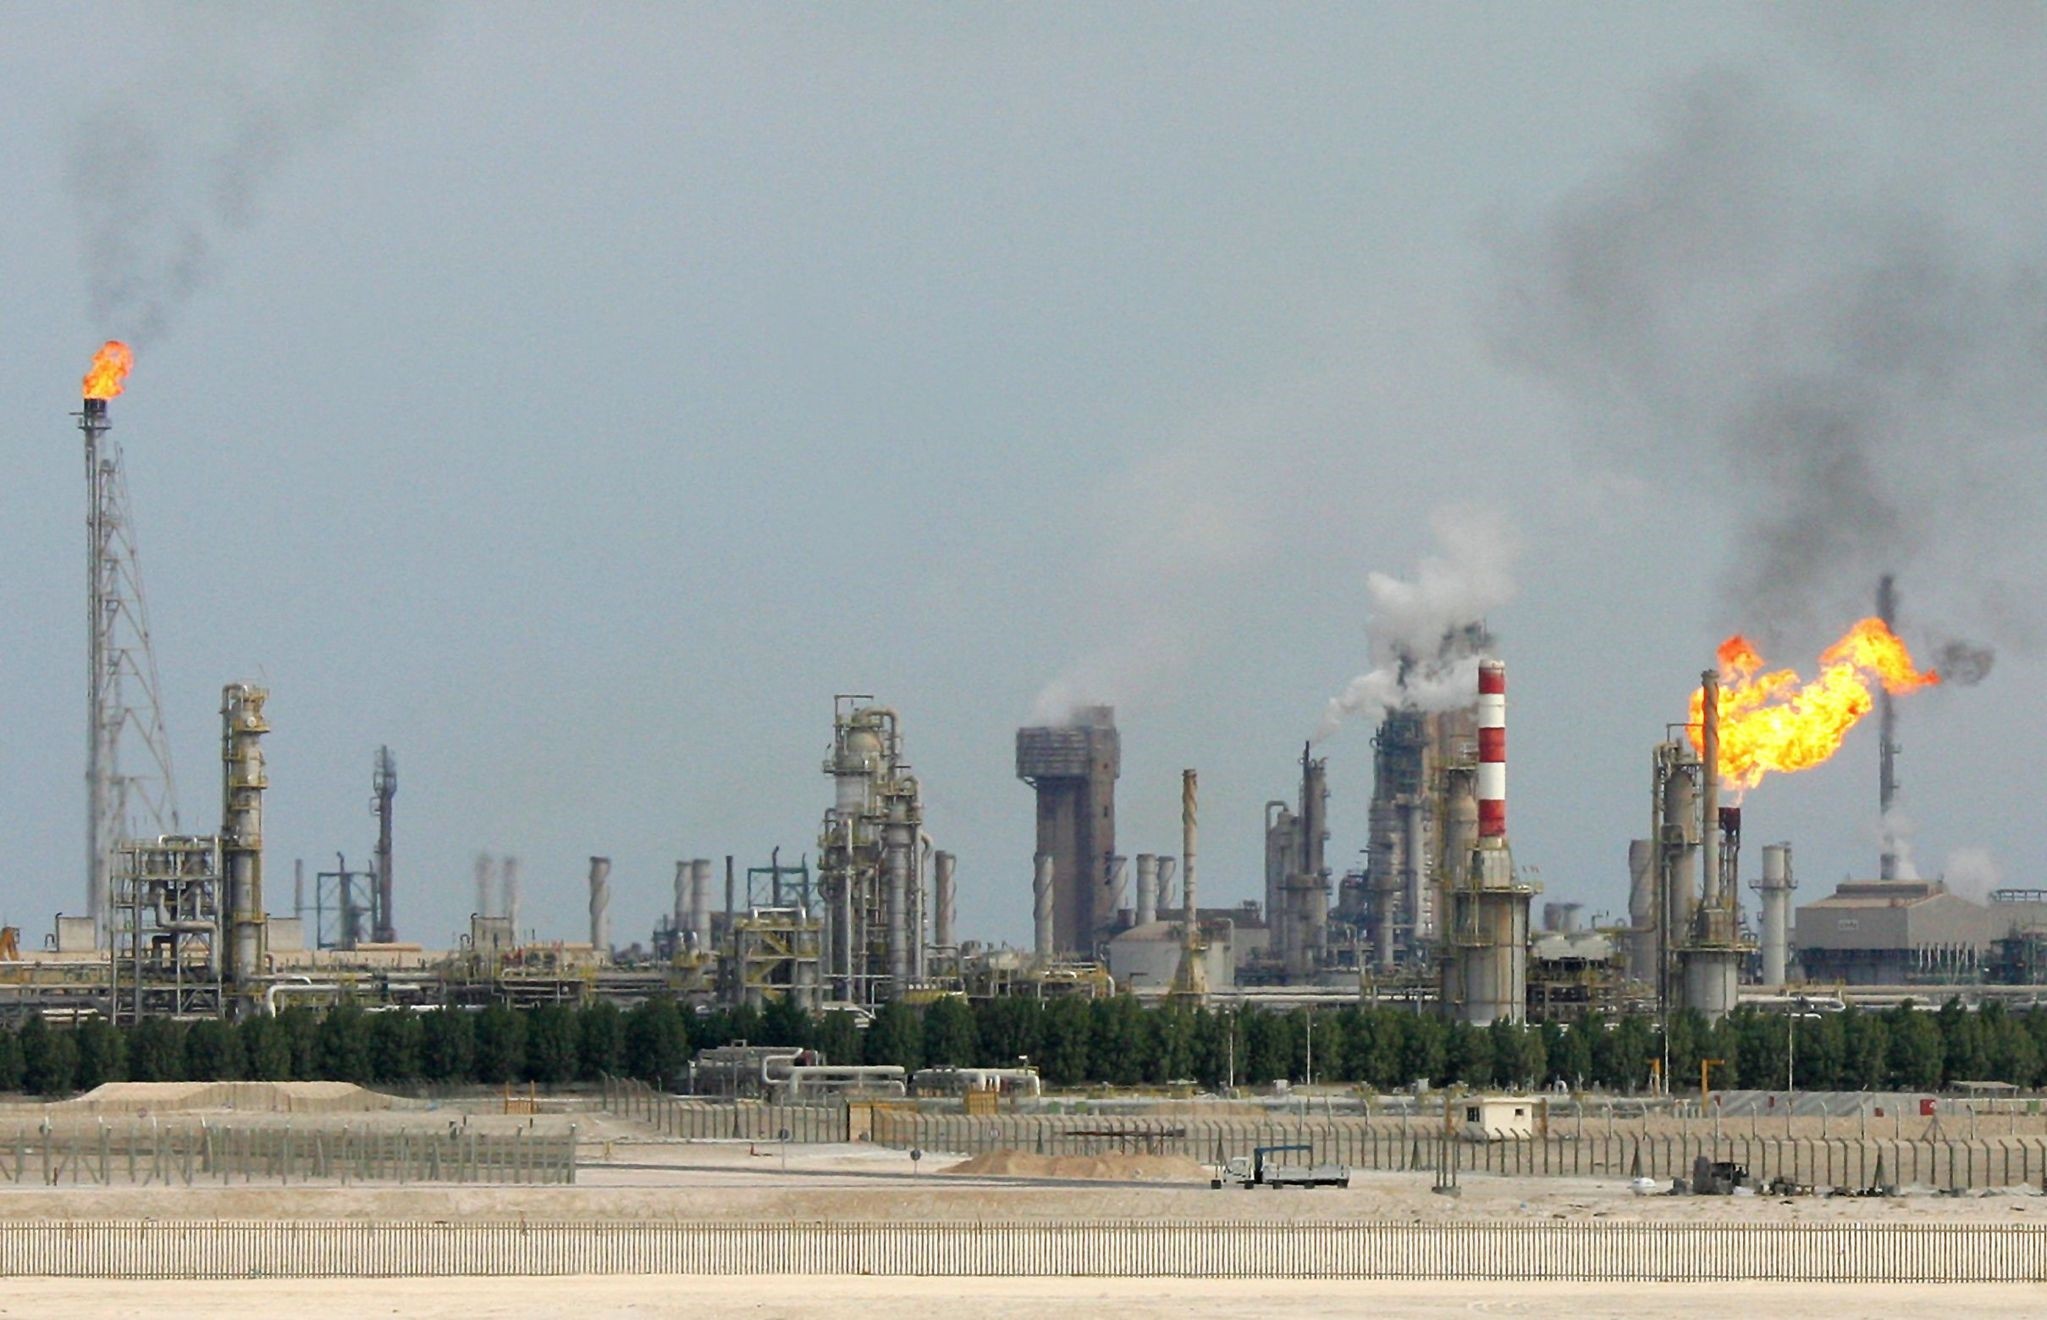  This file photo taken on February 1, 2006 shows an oil refinery on the outskirts of Doha. (AFP Photo)